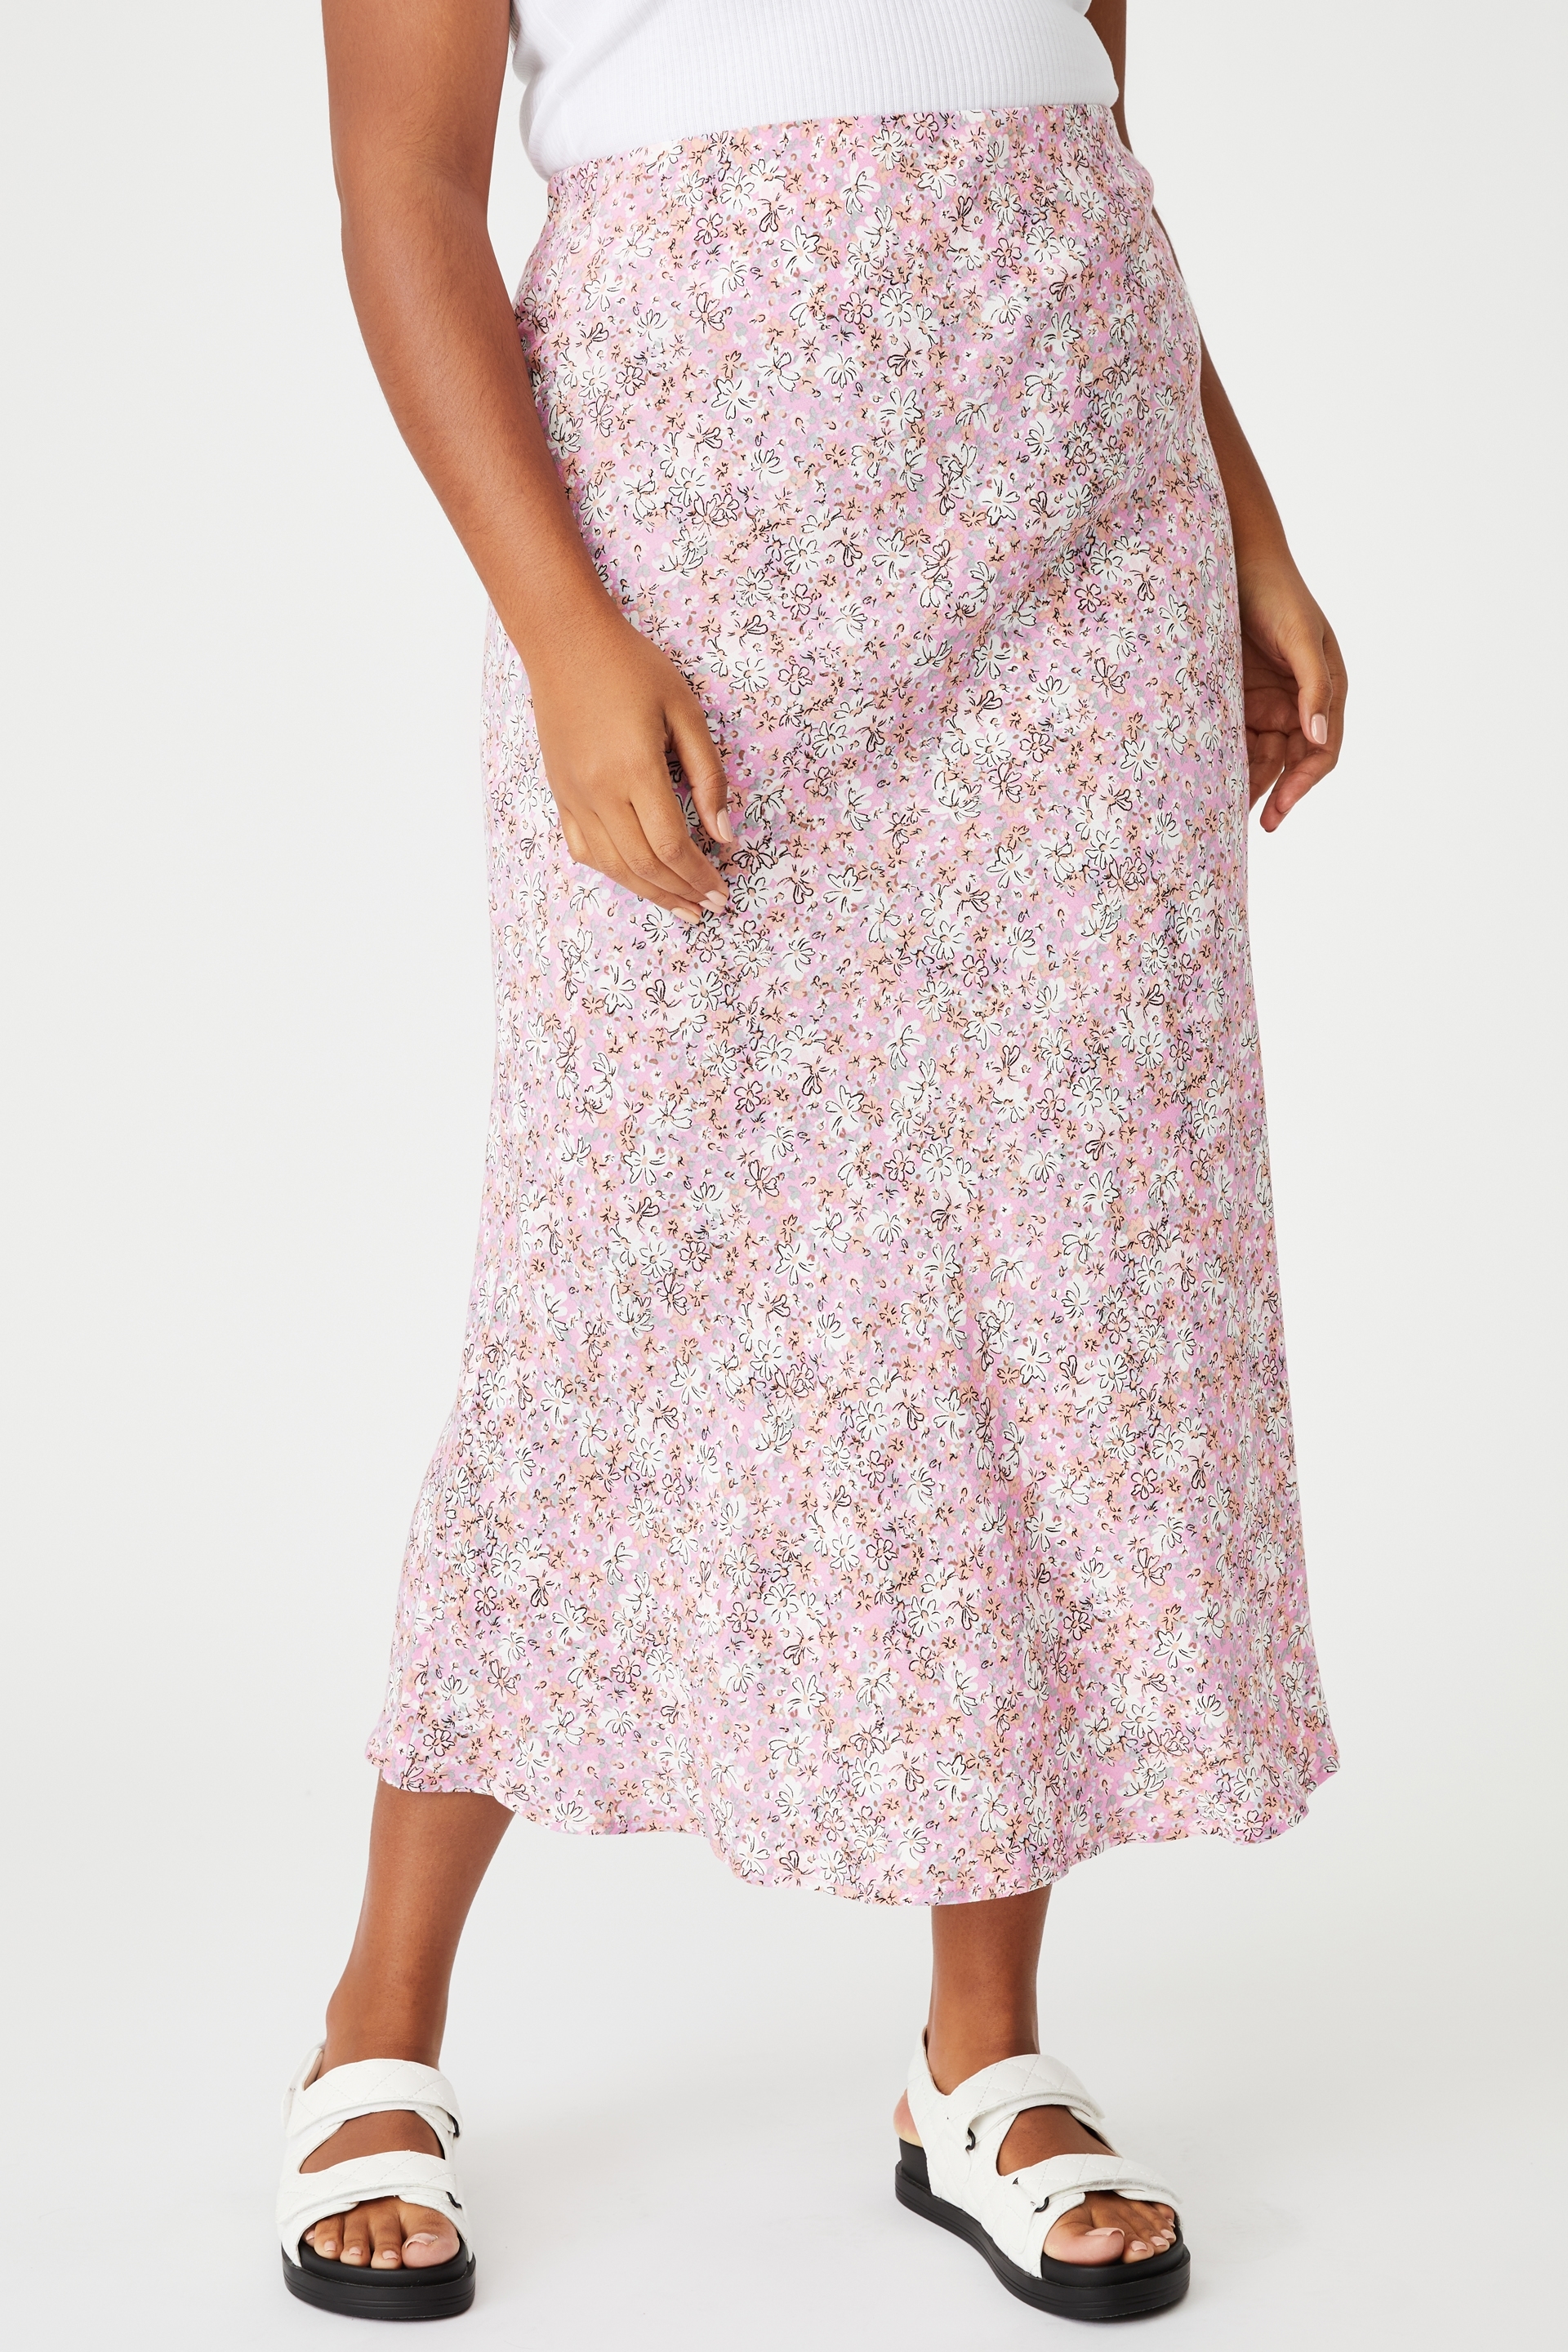 Cotton On Women - Curve All Day Slip Skirt - Diane floral pink cherry blossom